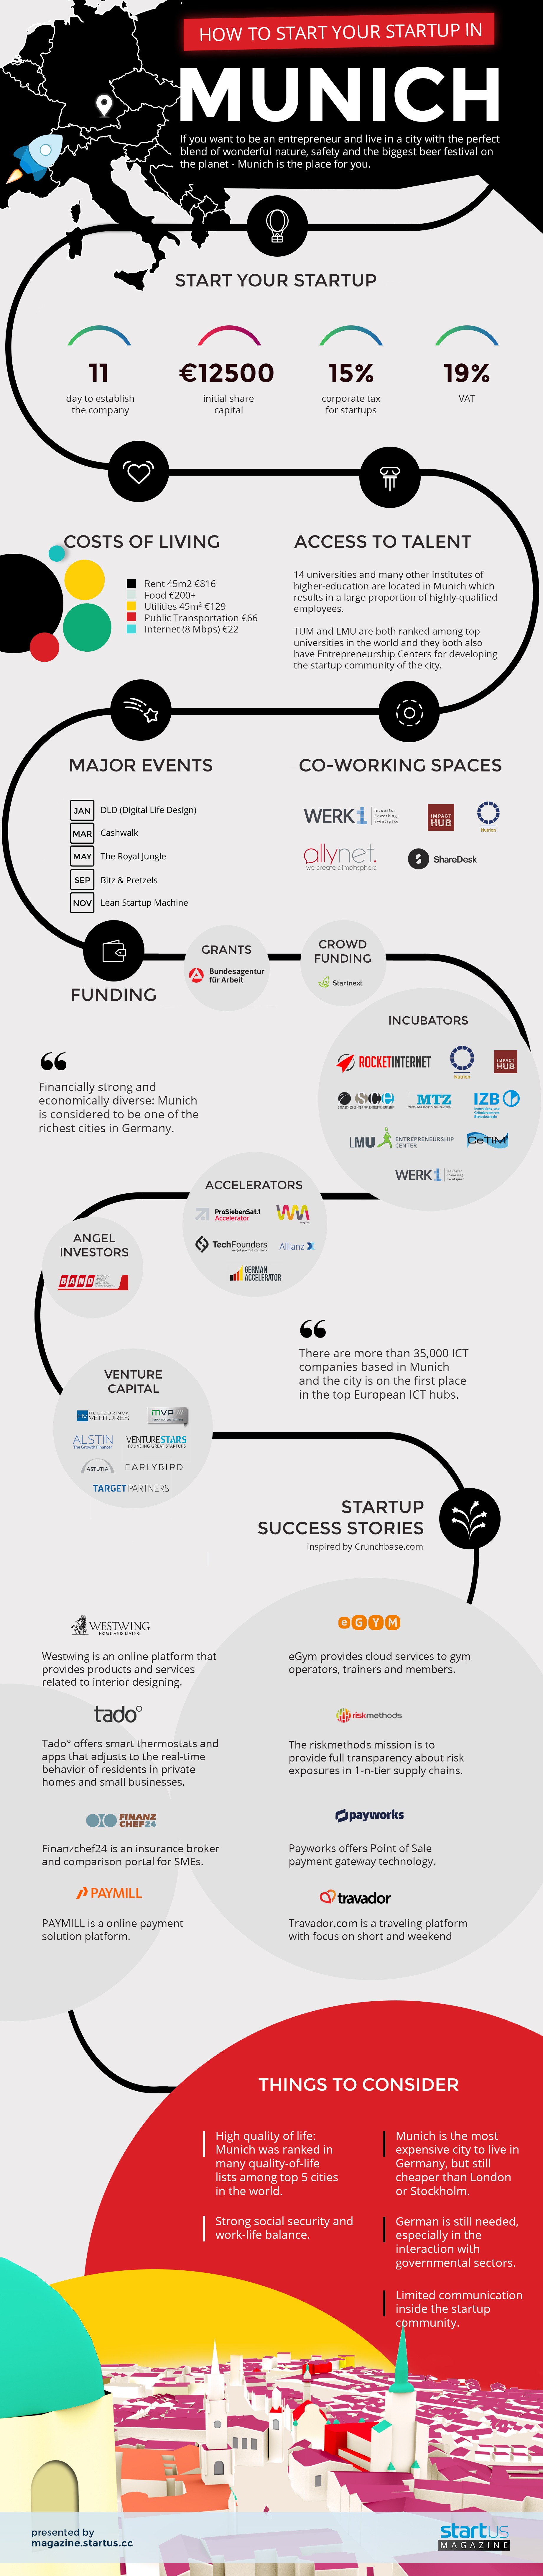 Infographic: How To Start Your Startup In Munich